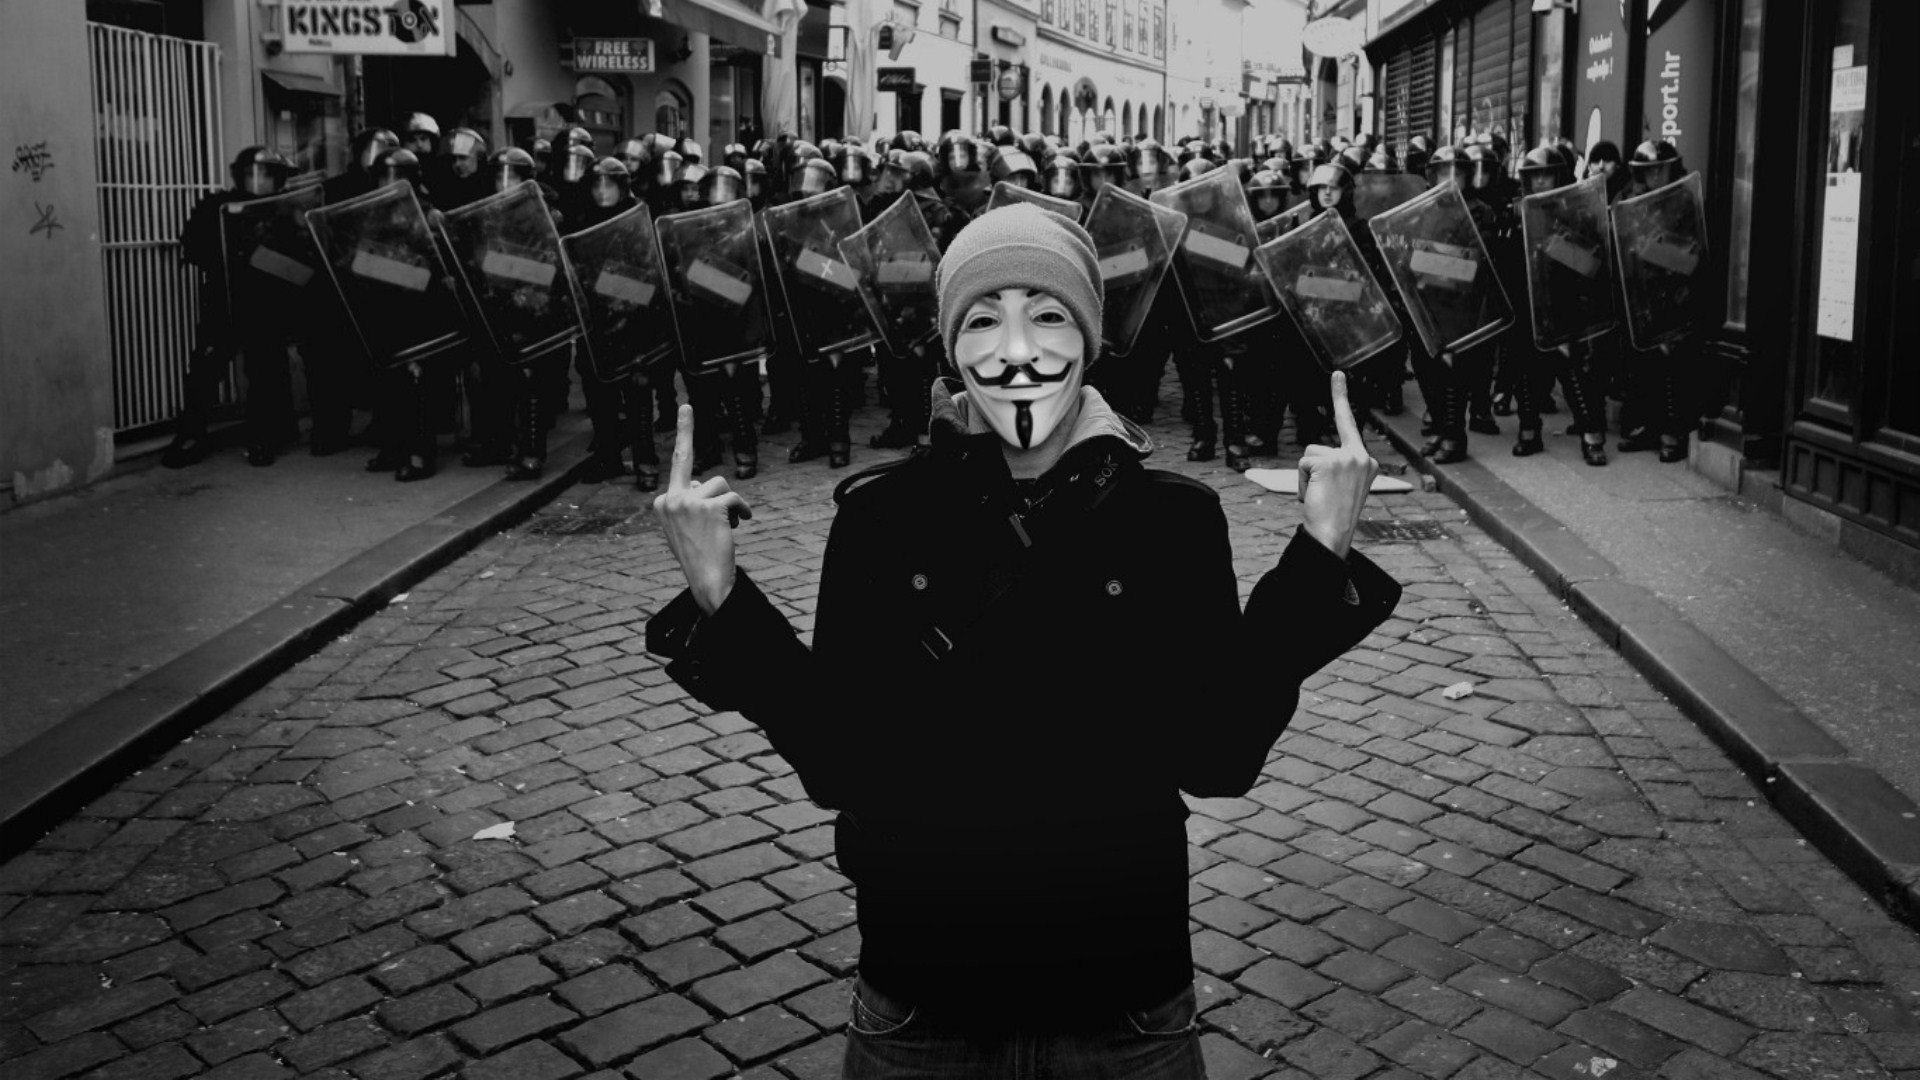 People 1920x1080 Guy Fawkes mask Anonymous (hacker group) pavements police shield middle finger monochrome mask city urban street